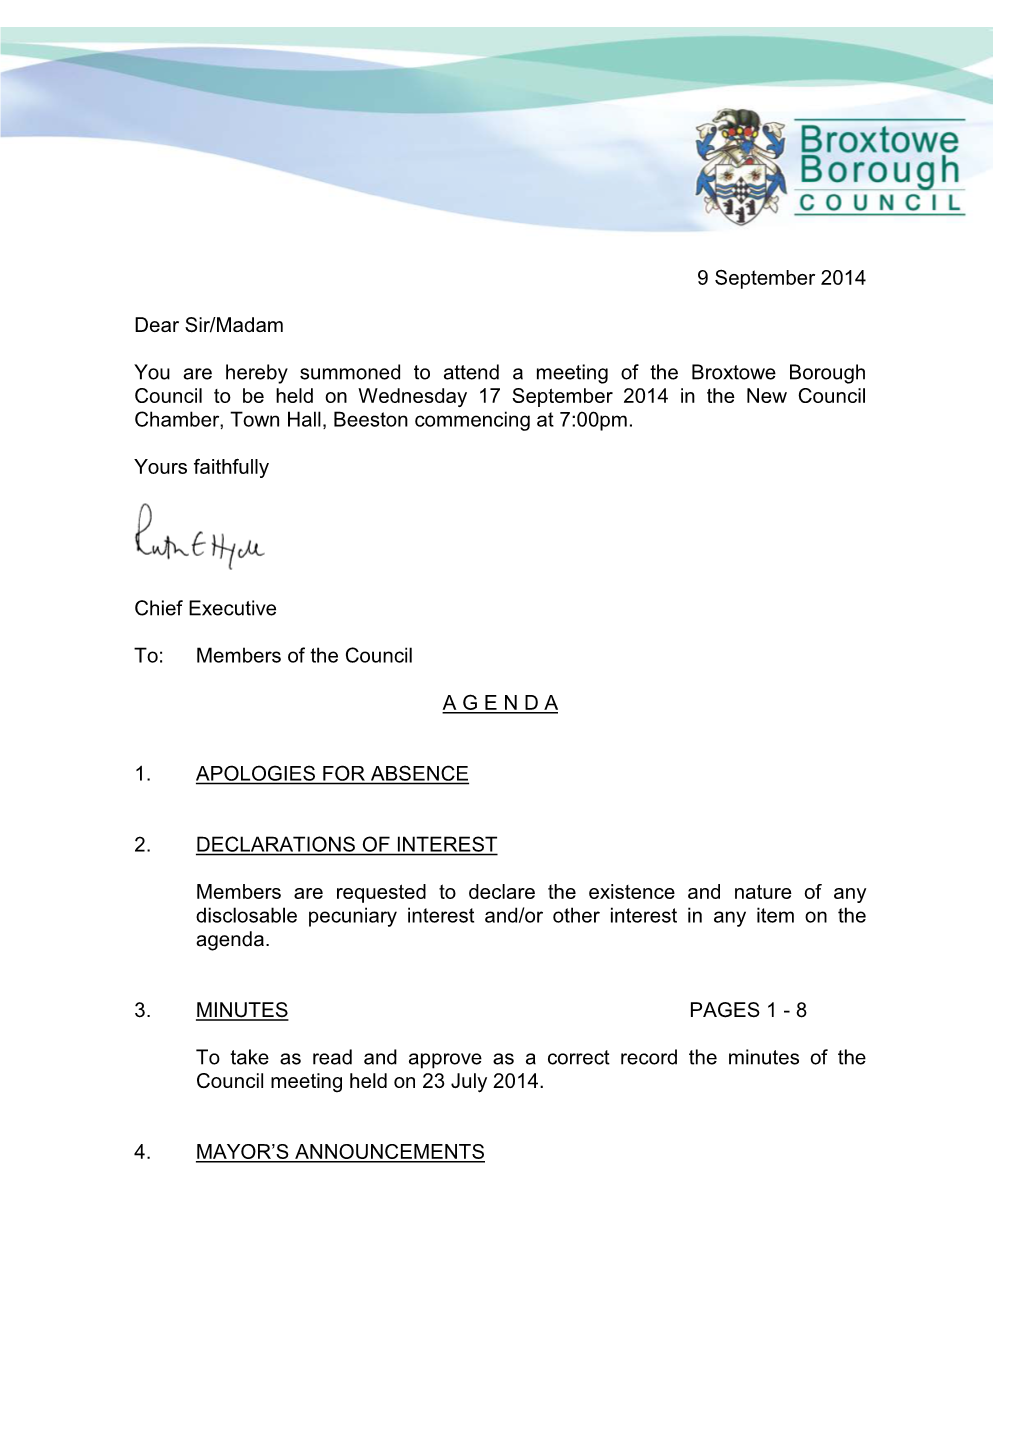 9 September 2014 Dear Sir/Madam You Are Hereby Summoned to Attend a Meeting of the Broxtowe Borough Council to Be Held on Wednes